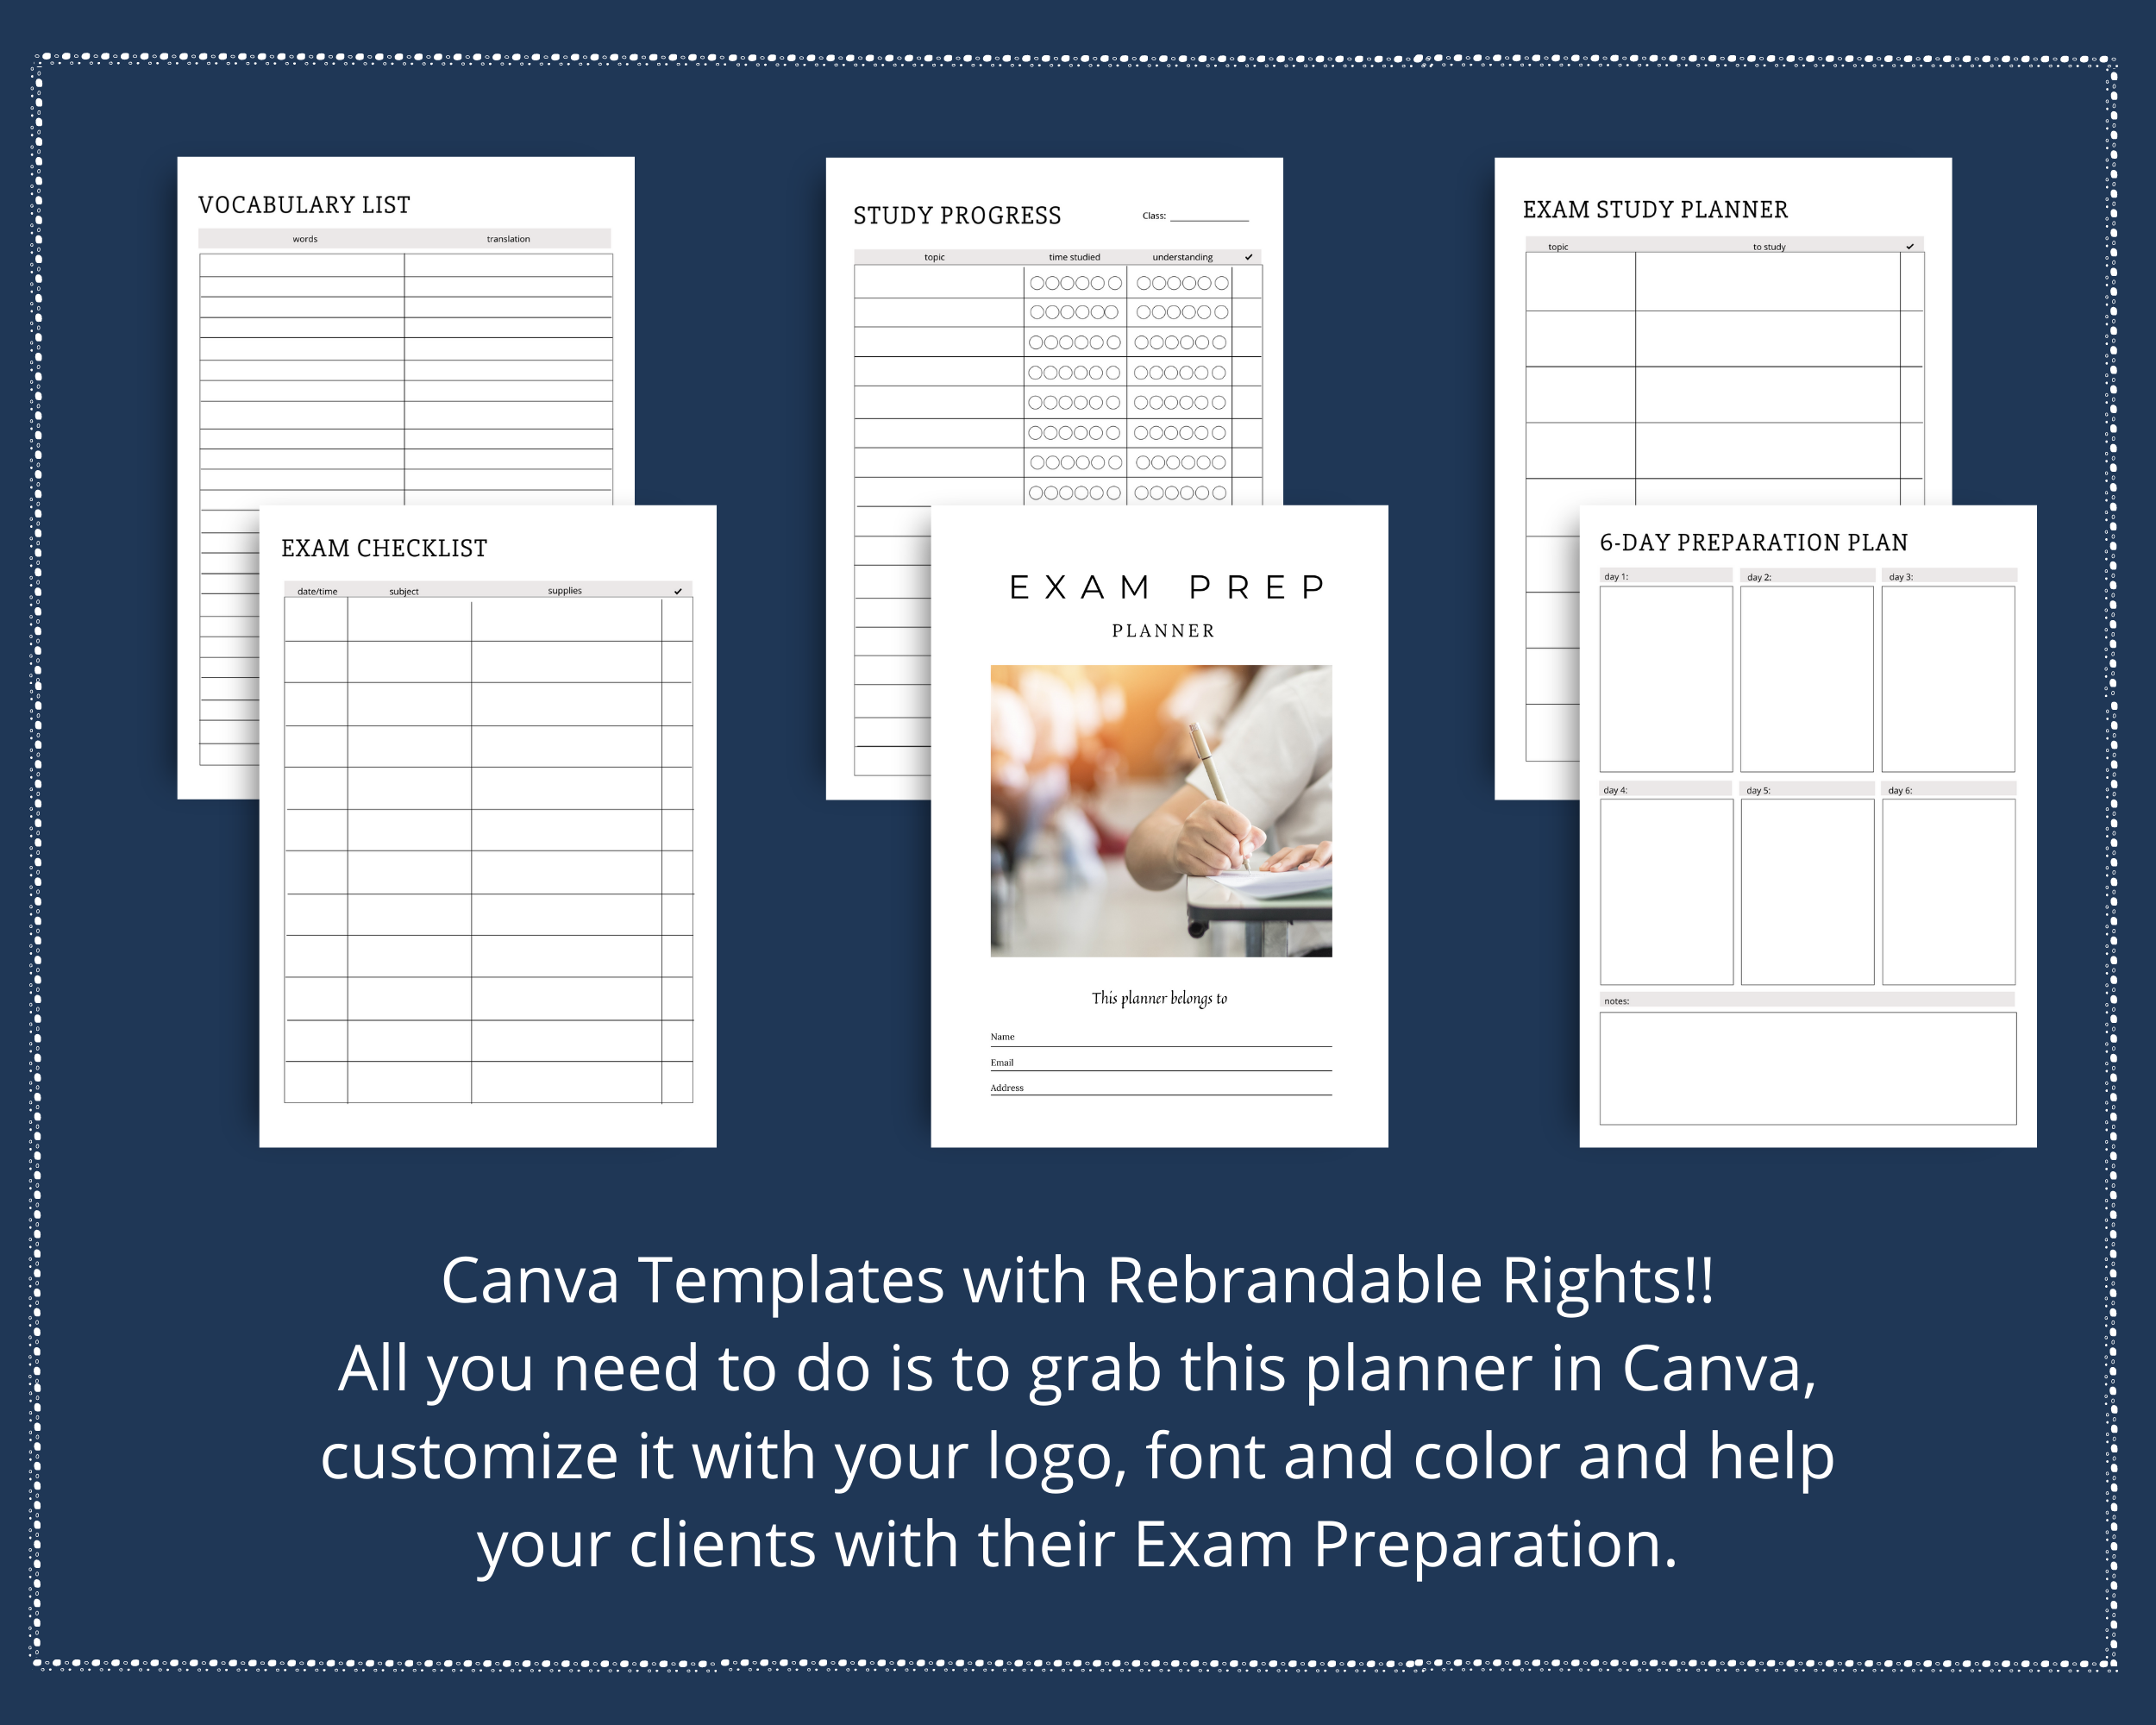 Editable Exam Preparation Planner in Canva | Commercial Use